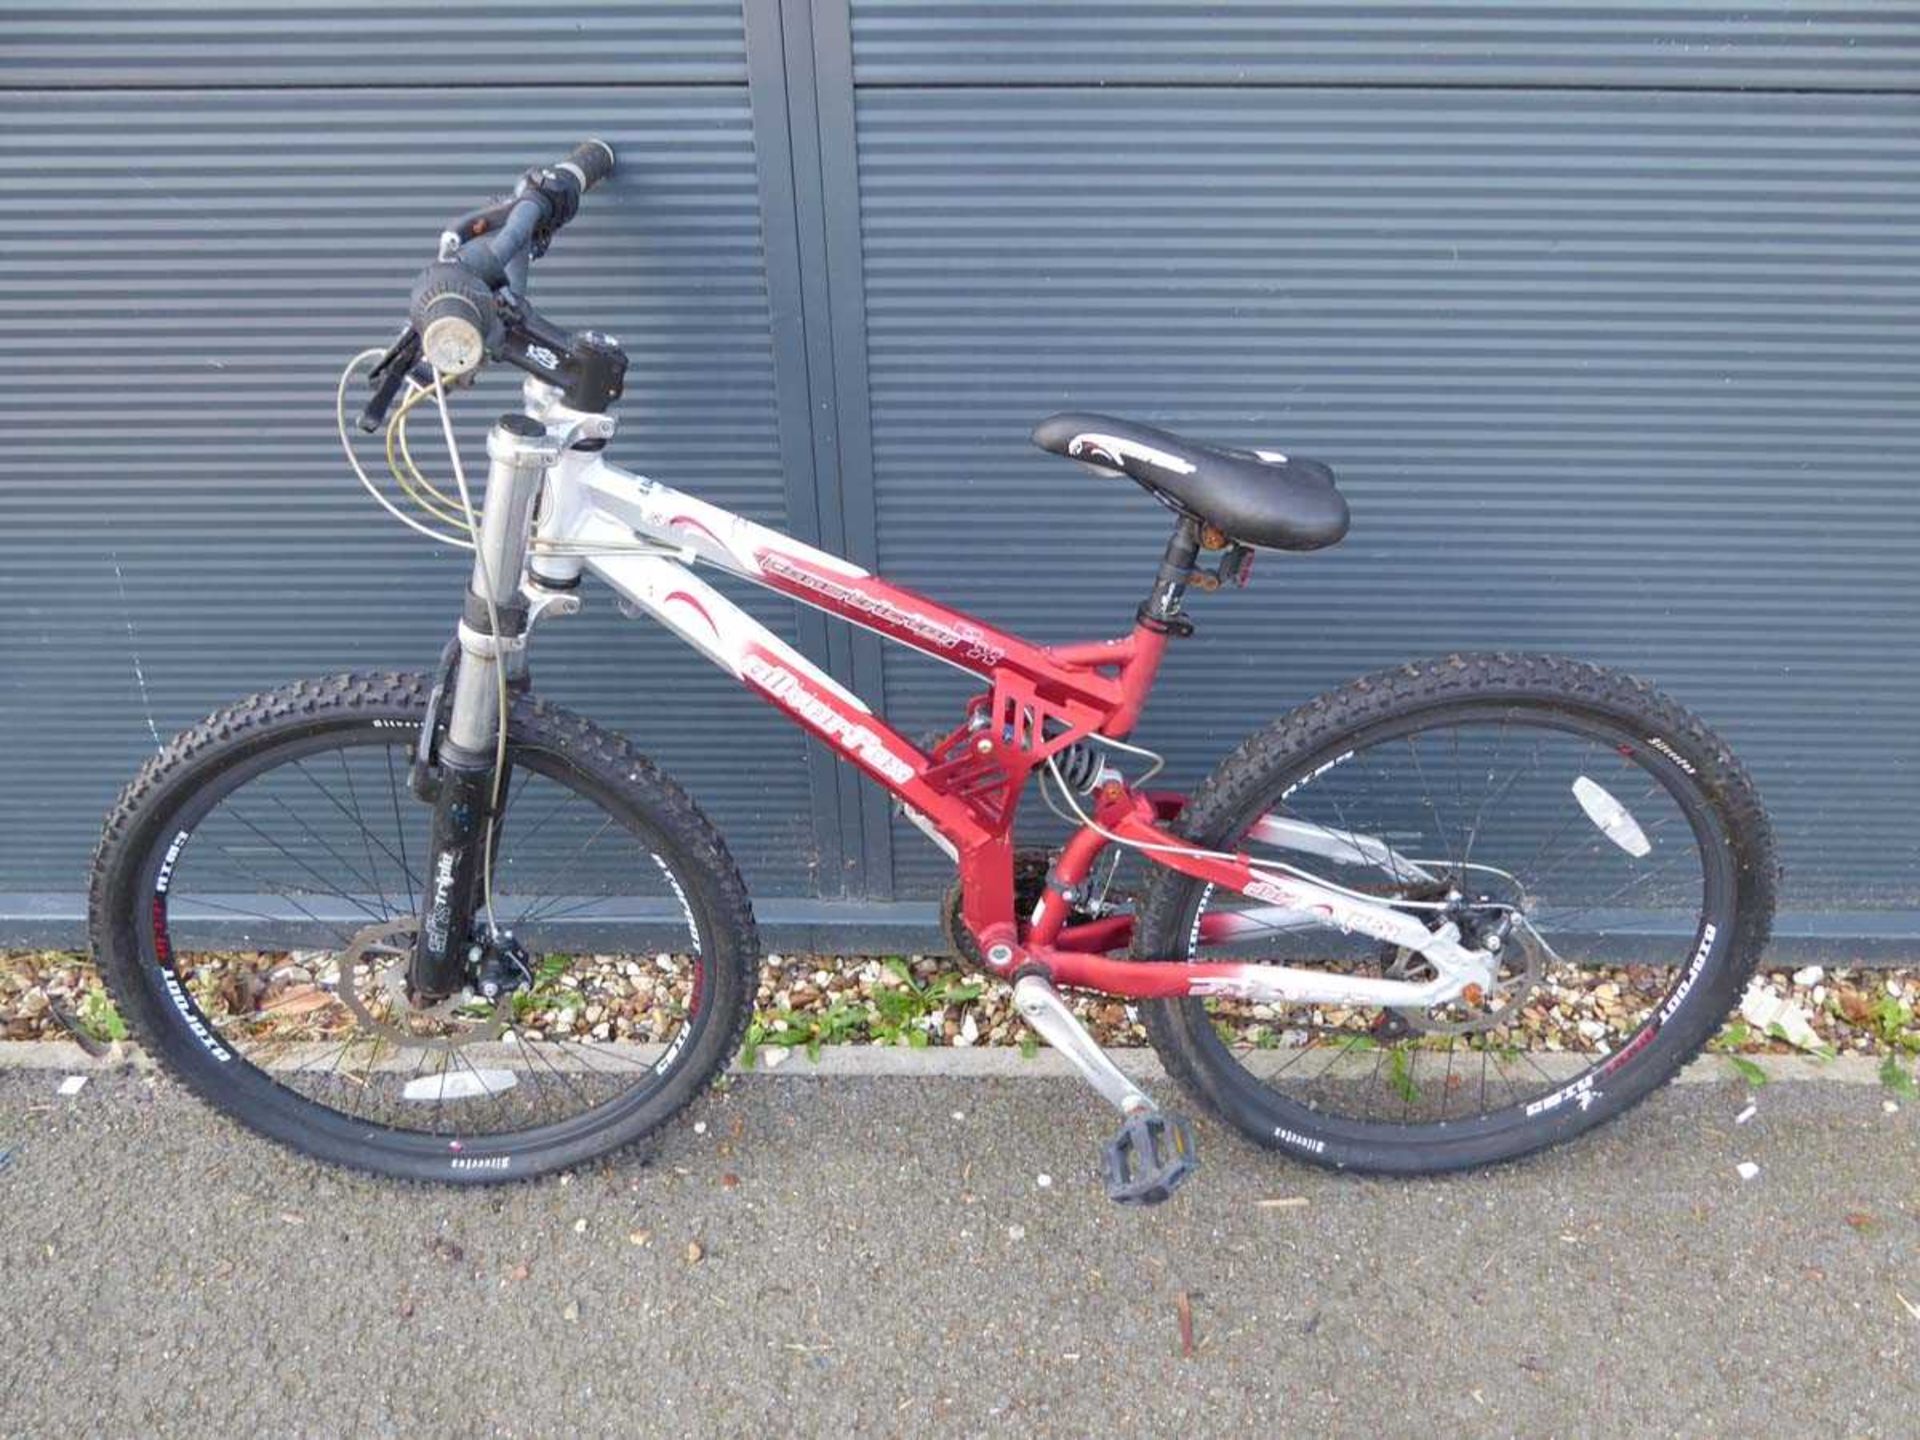 Silver fox red and white mountain bike